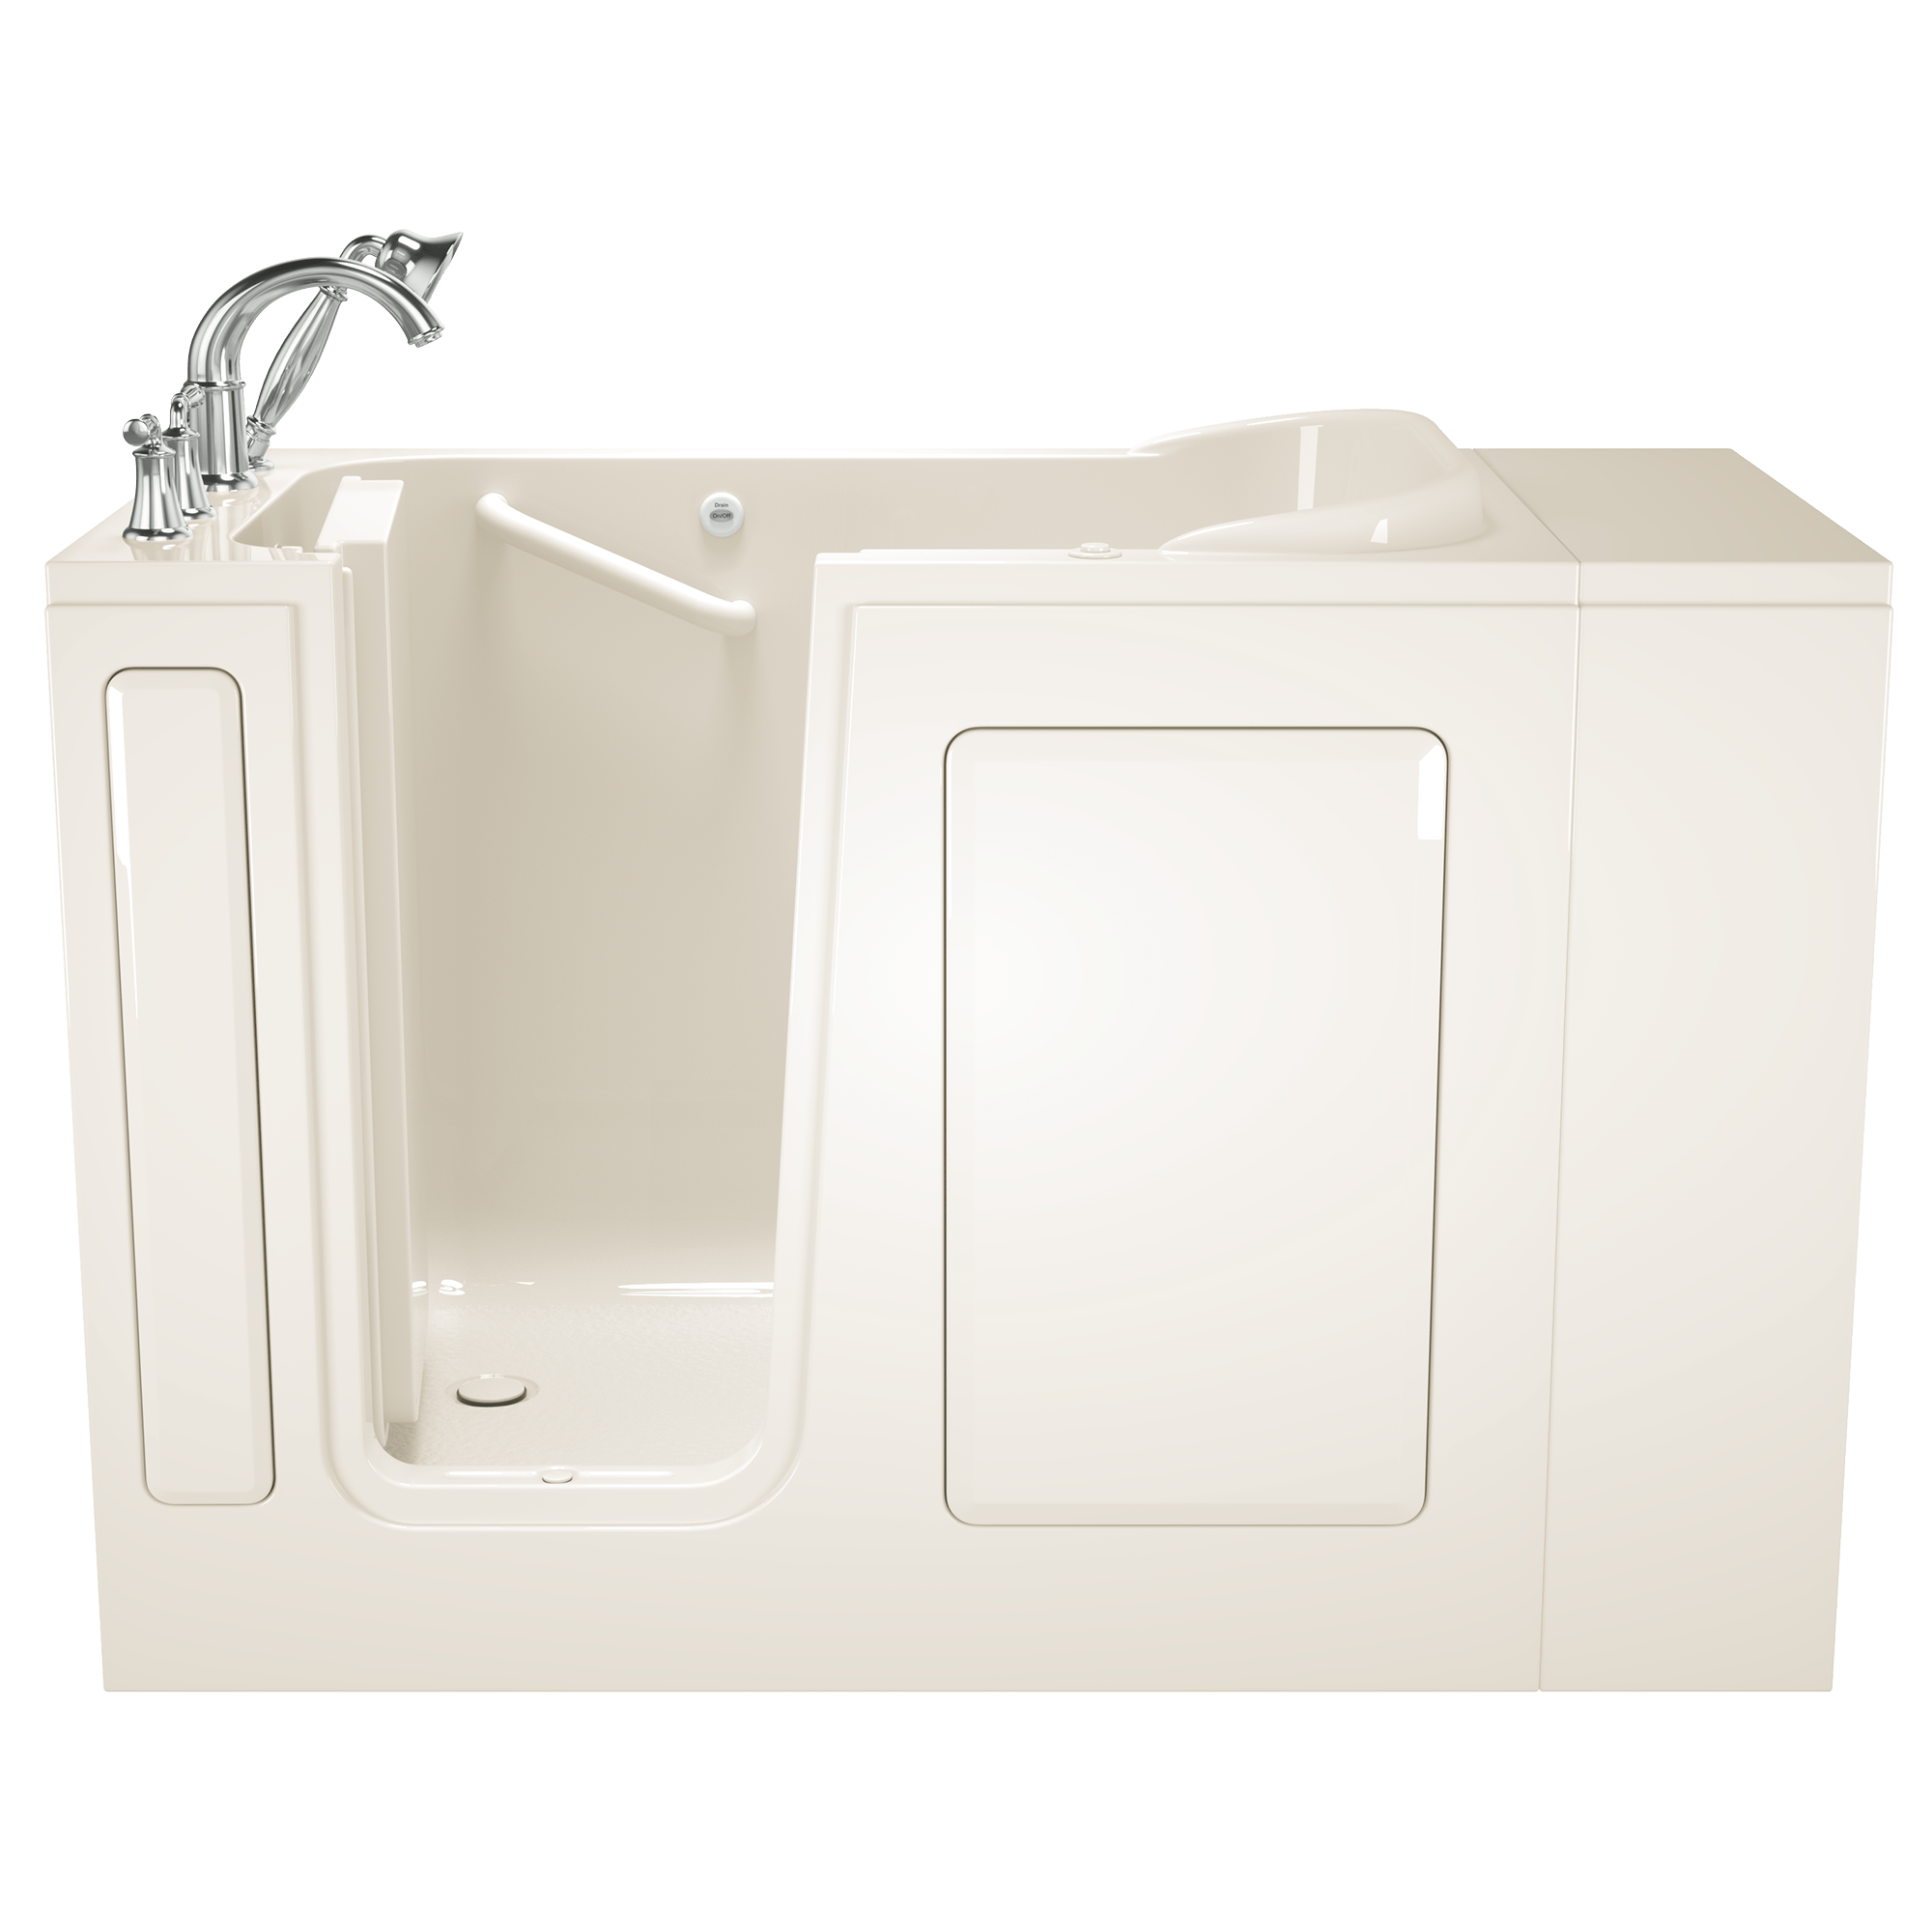 Gelcoat Value Series 28 x 48 Inch Walk in Tub With Air Spa System   Left Hand Drain With Faucet WIB LINEN